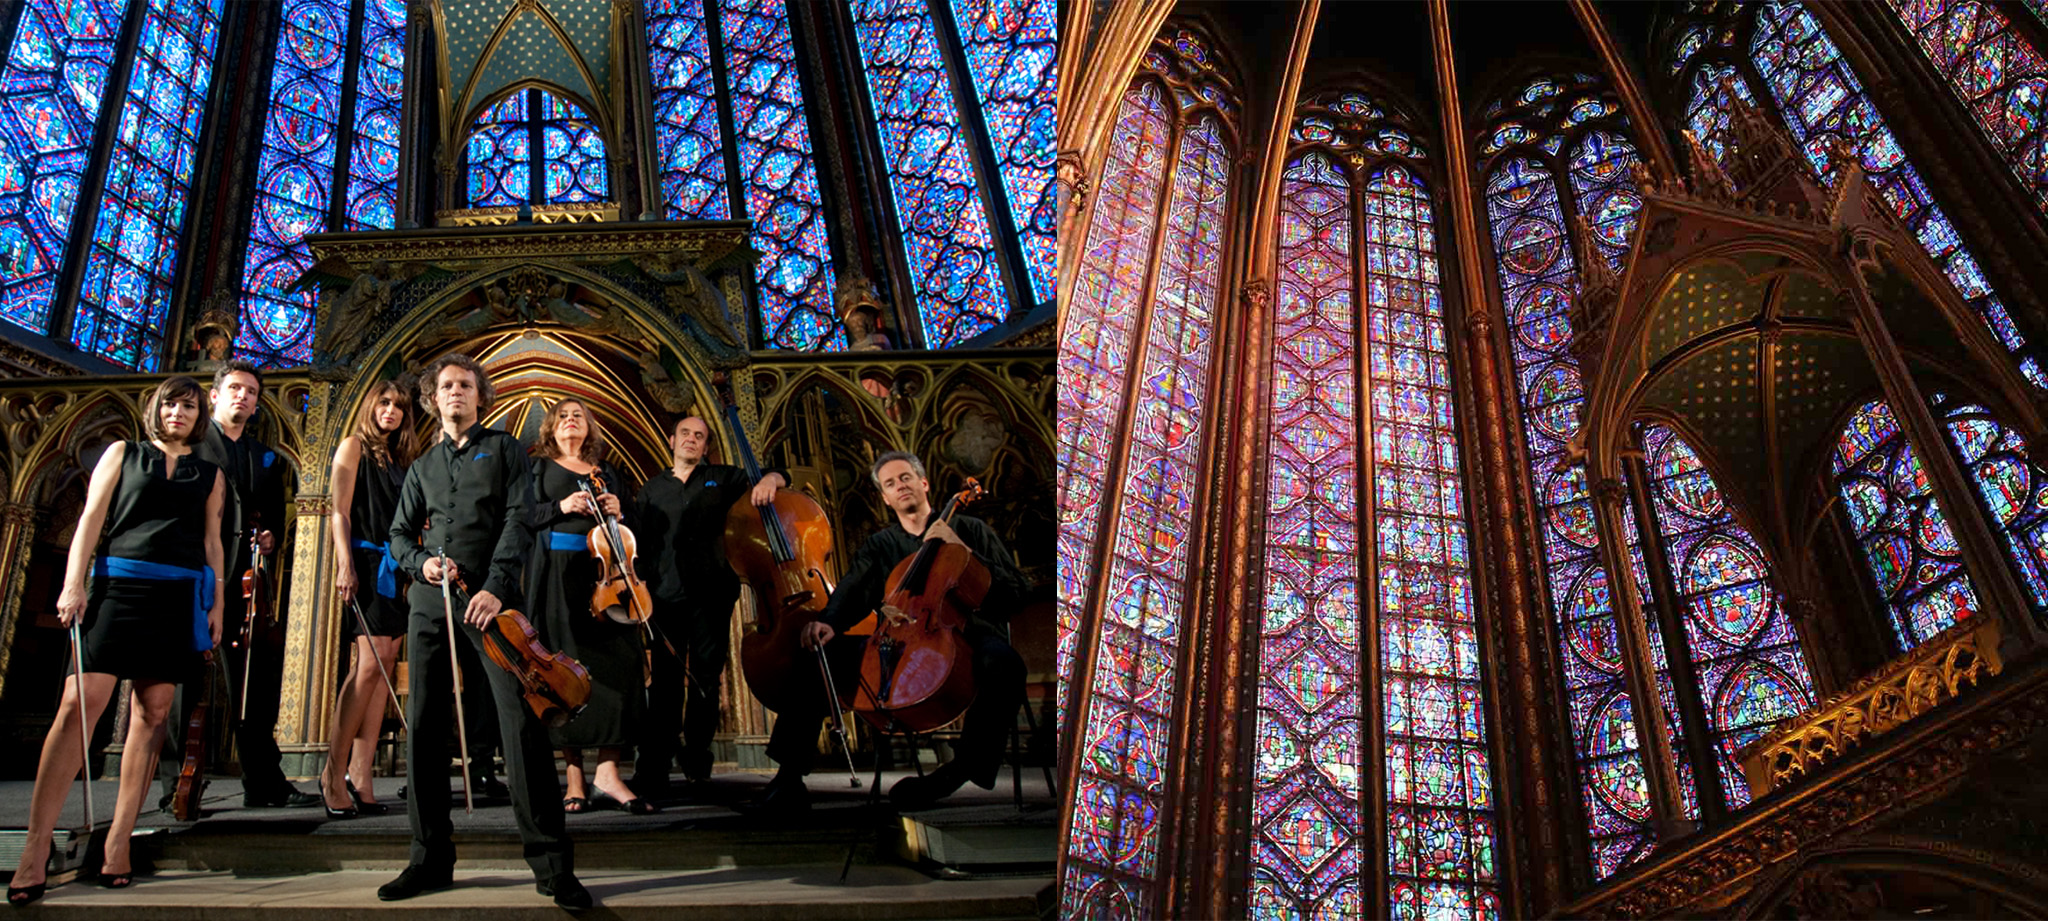 photos from events at the Sainte-Chapelle